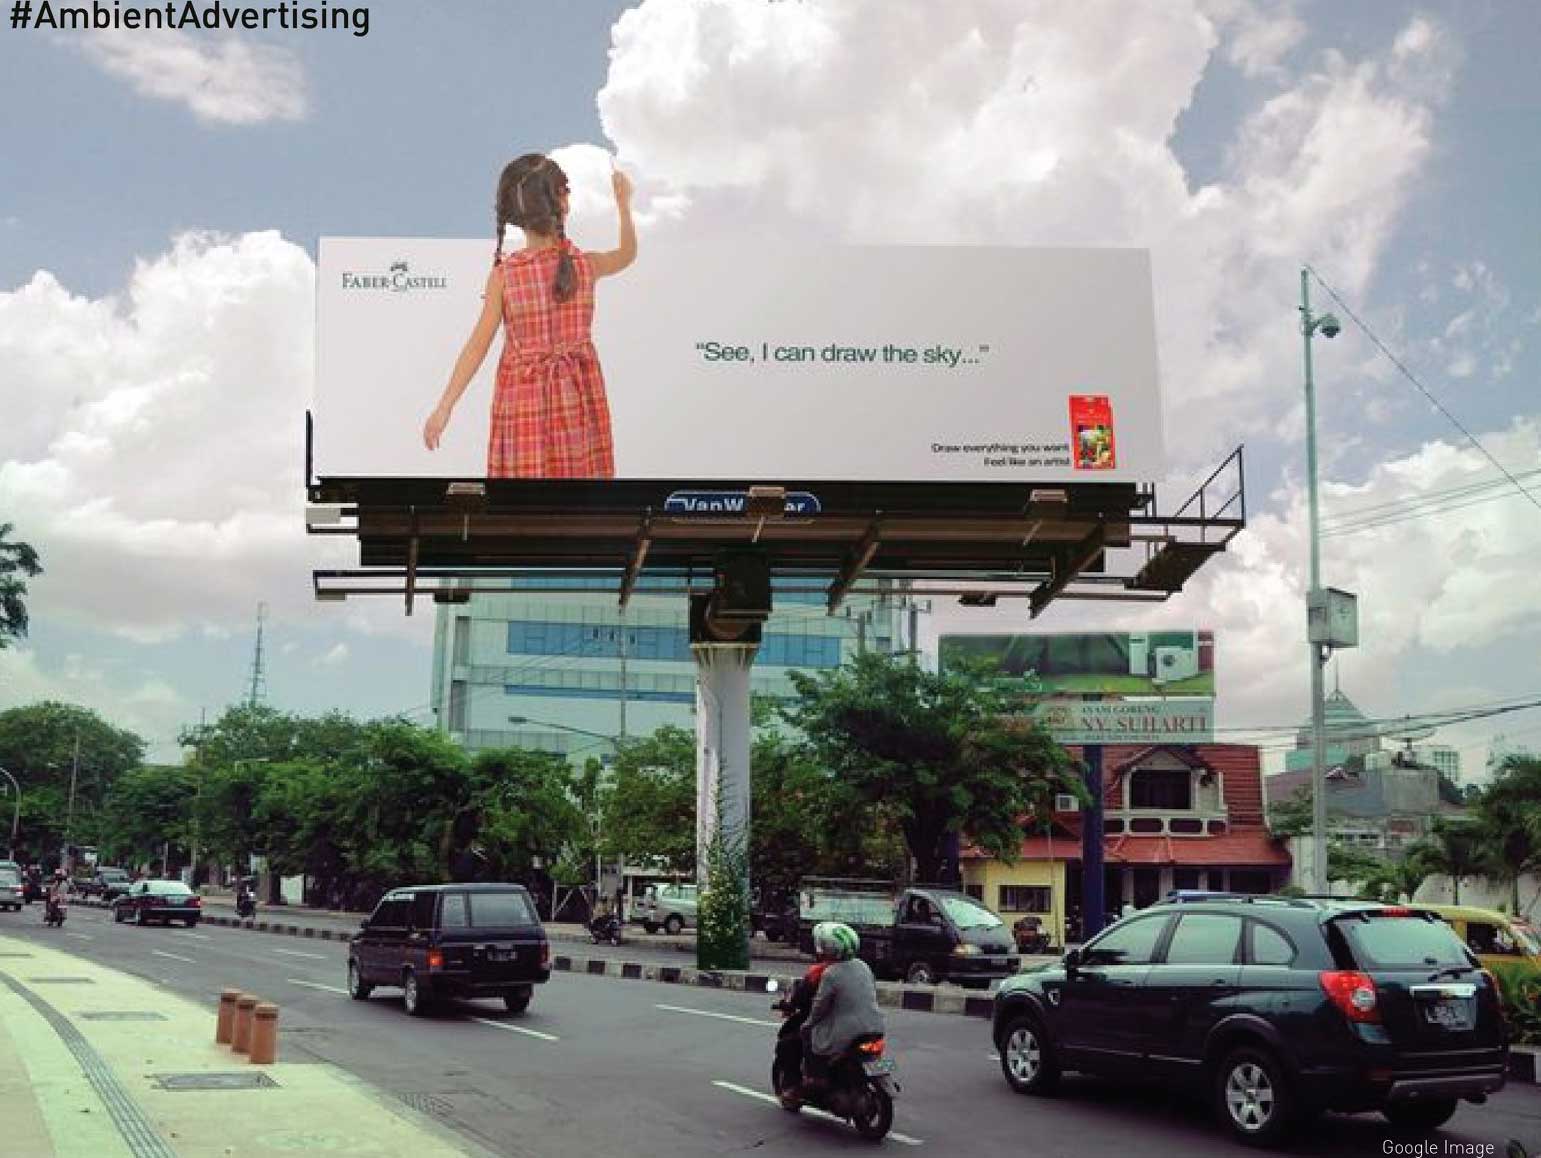 How to get started with your Outdoor Advertising